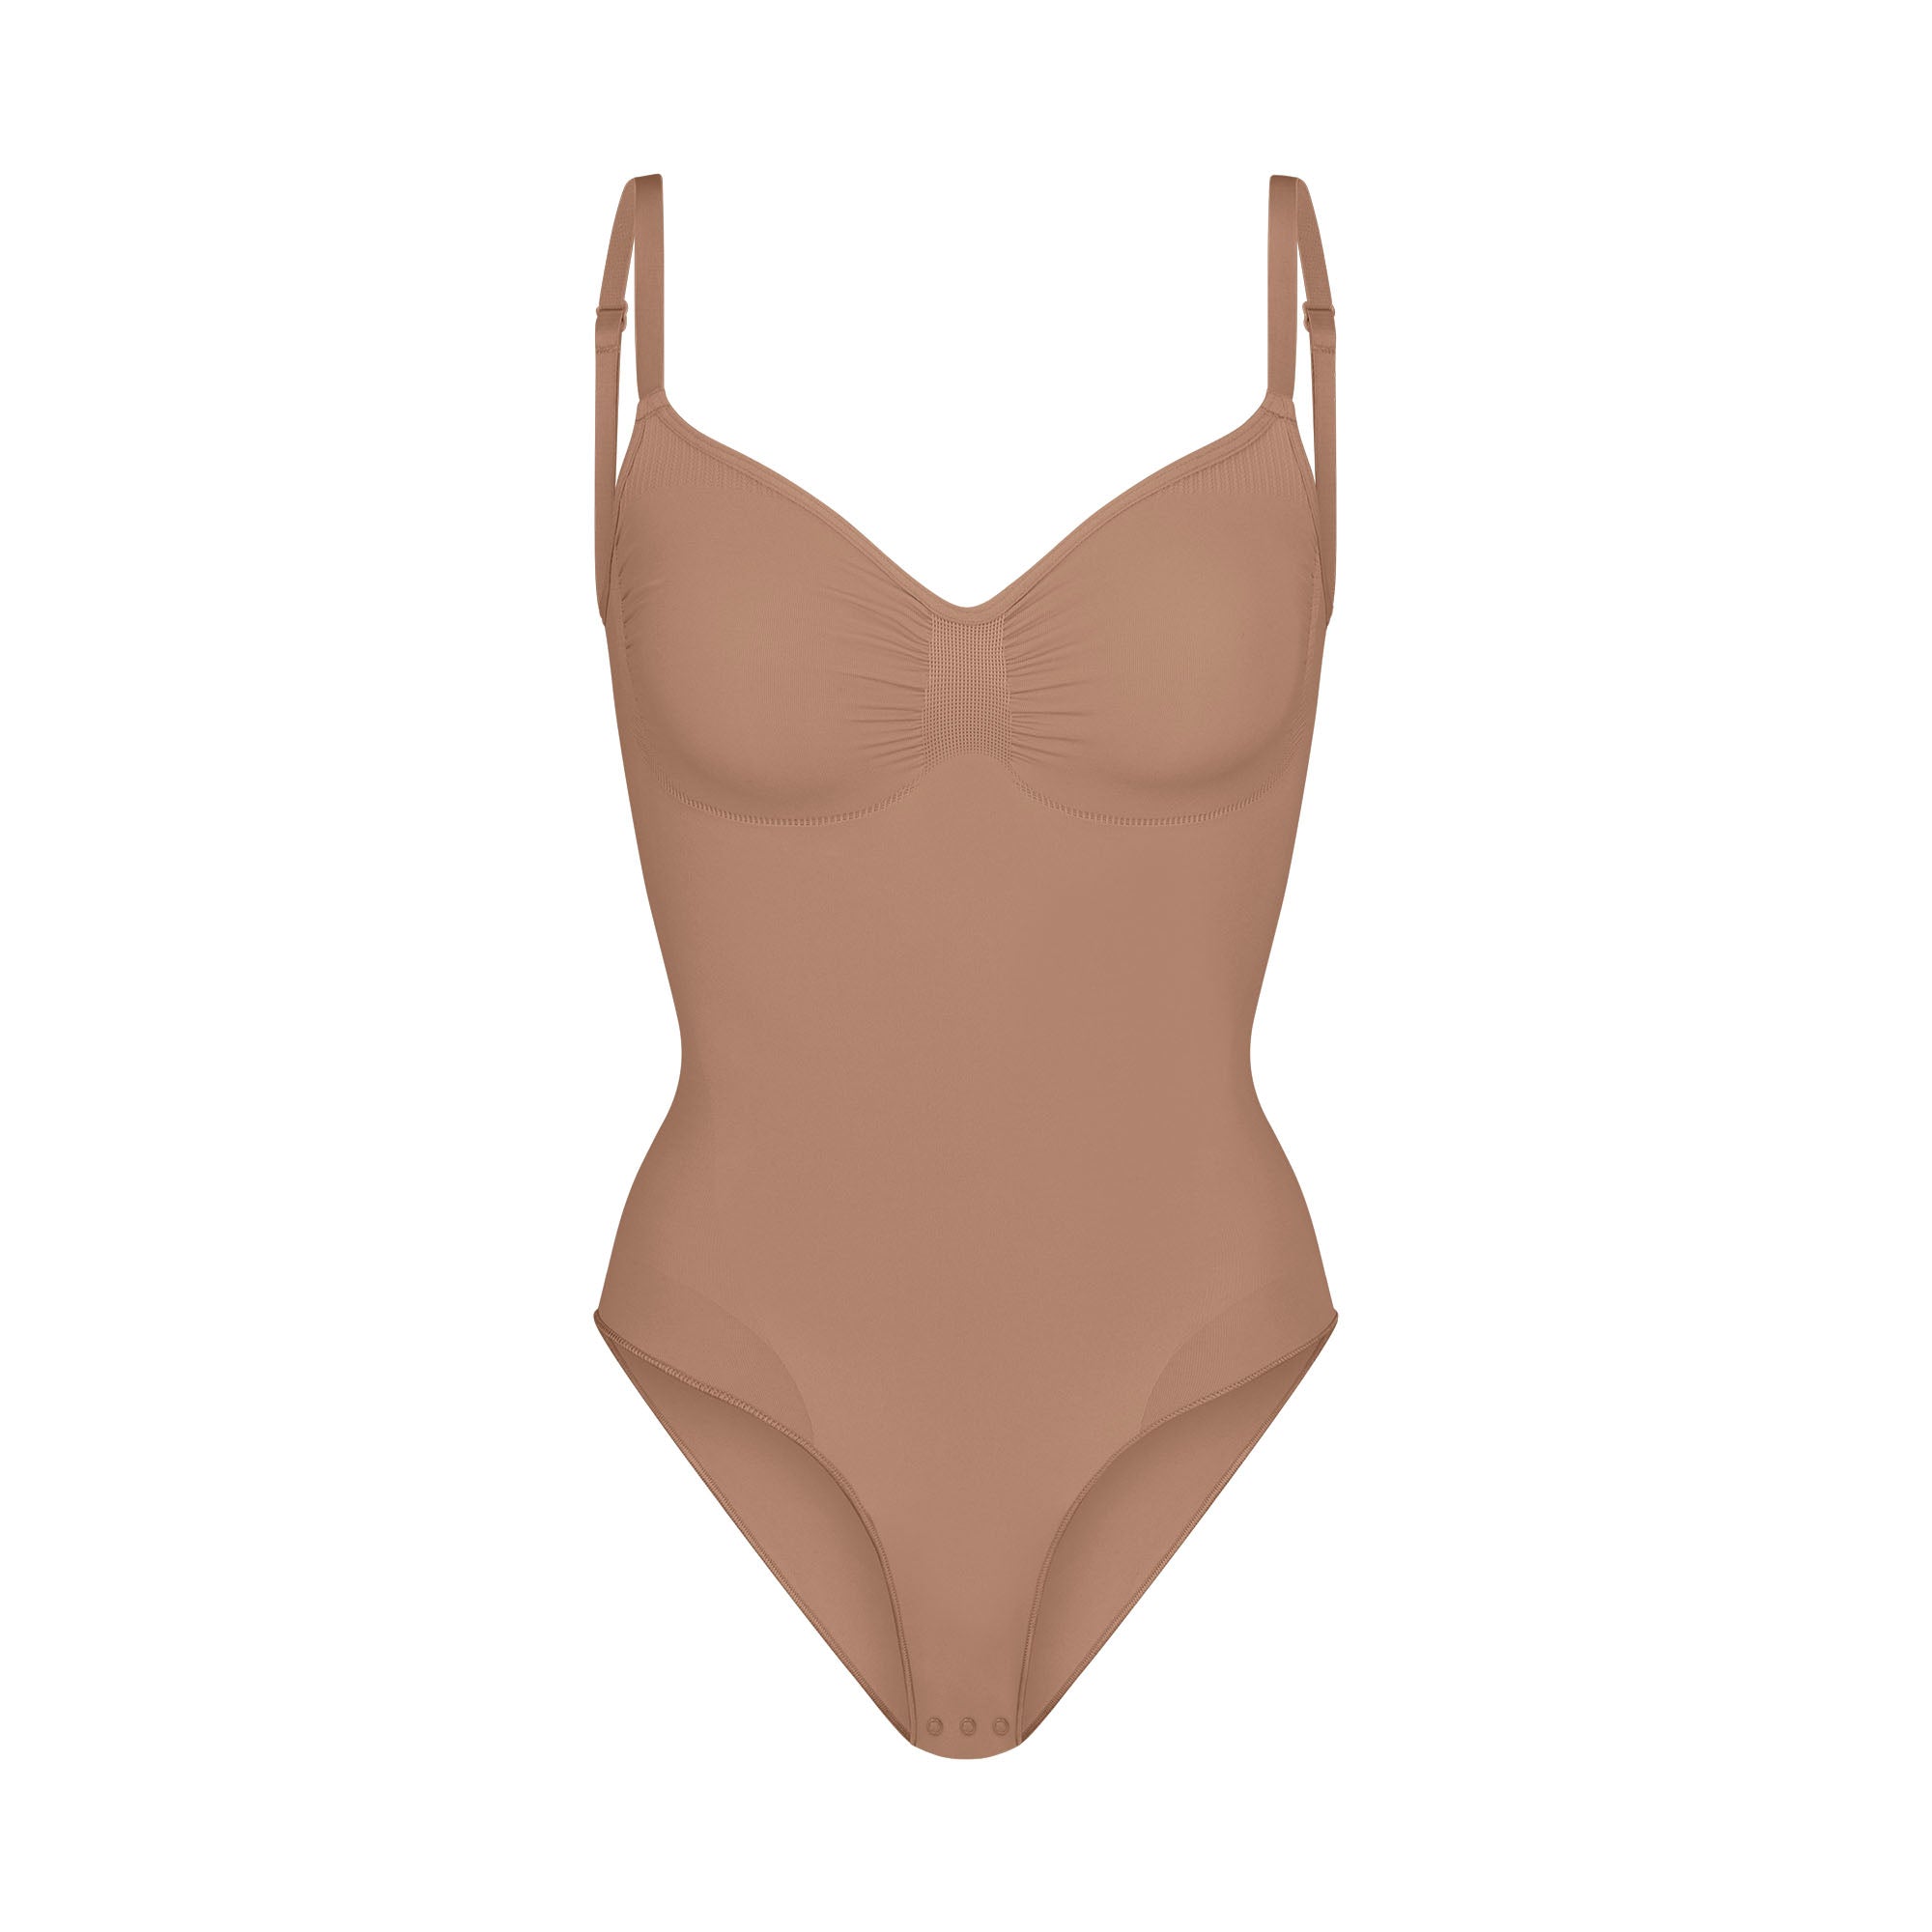 SKIMS on X: .@KimKardashian wears the Sculpting Bodysuit in Sienna —  restocking tomorrow, Monday March 30 at 9AM PST / 12PM EST. With this  restock, SKIMS will be able to help bring